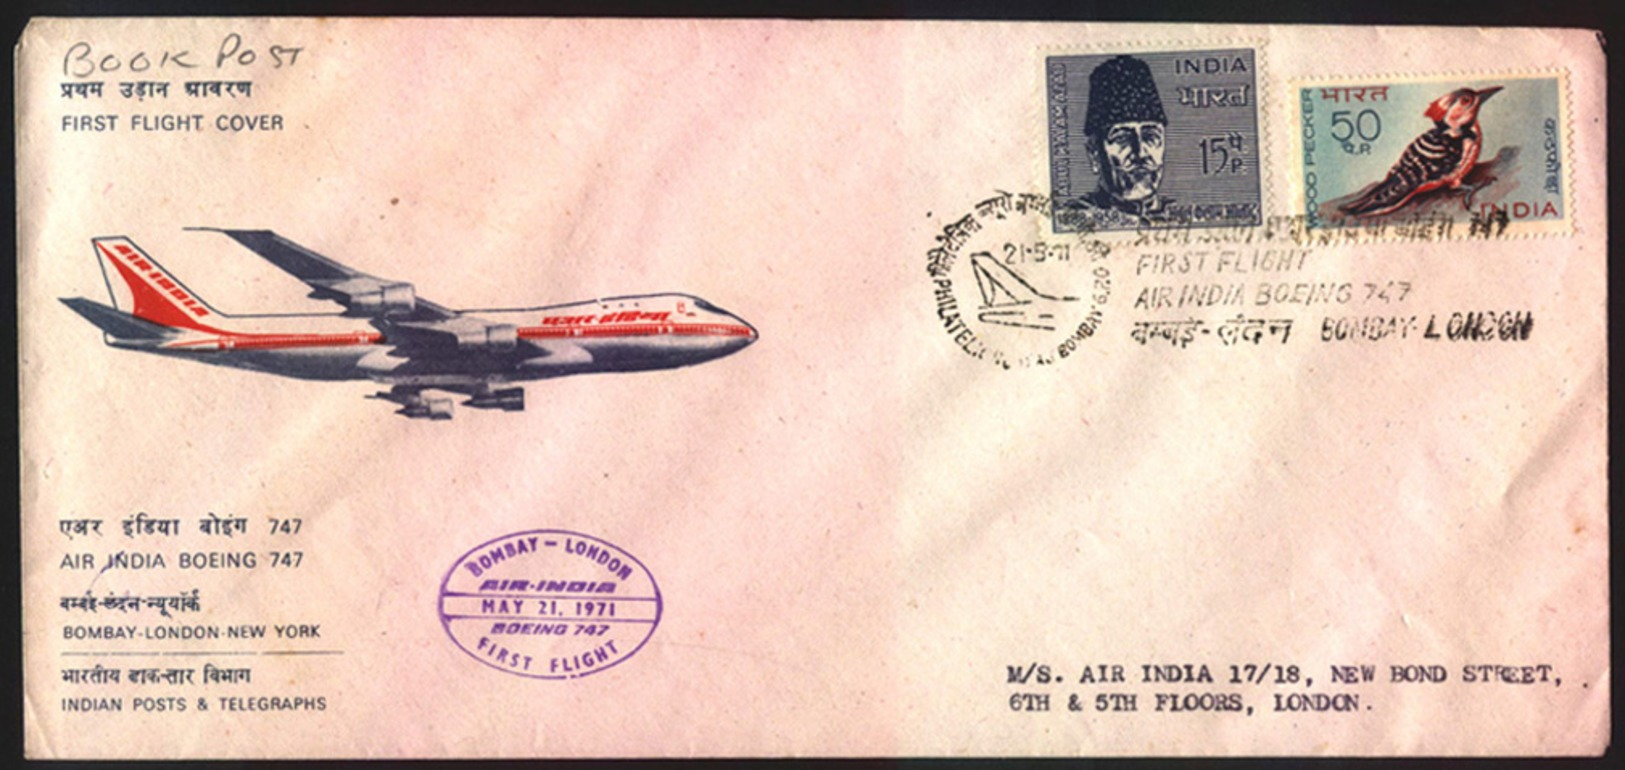 INDIA STAMPS, FIRST FLIGHT COVER, 21 MAY 1971 - Poste Aérienne